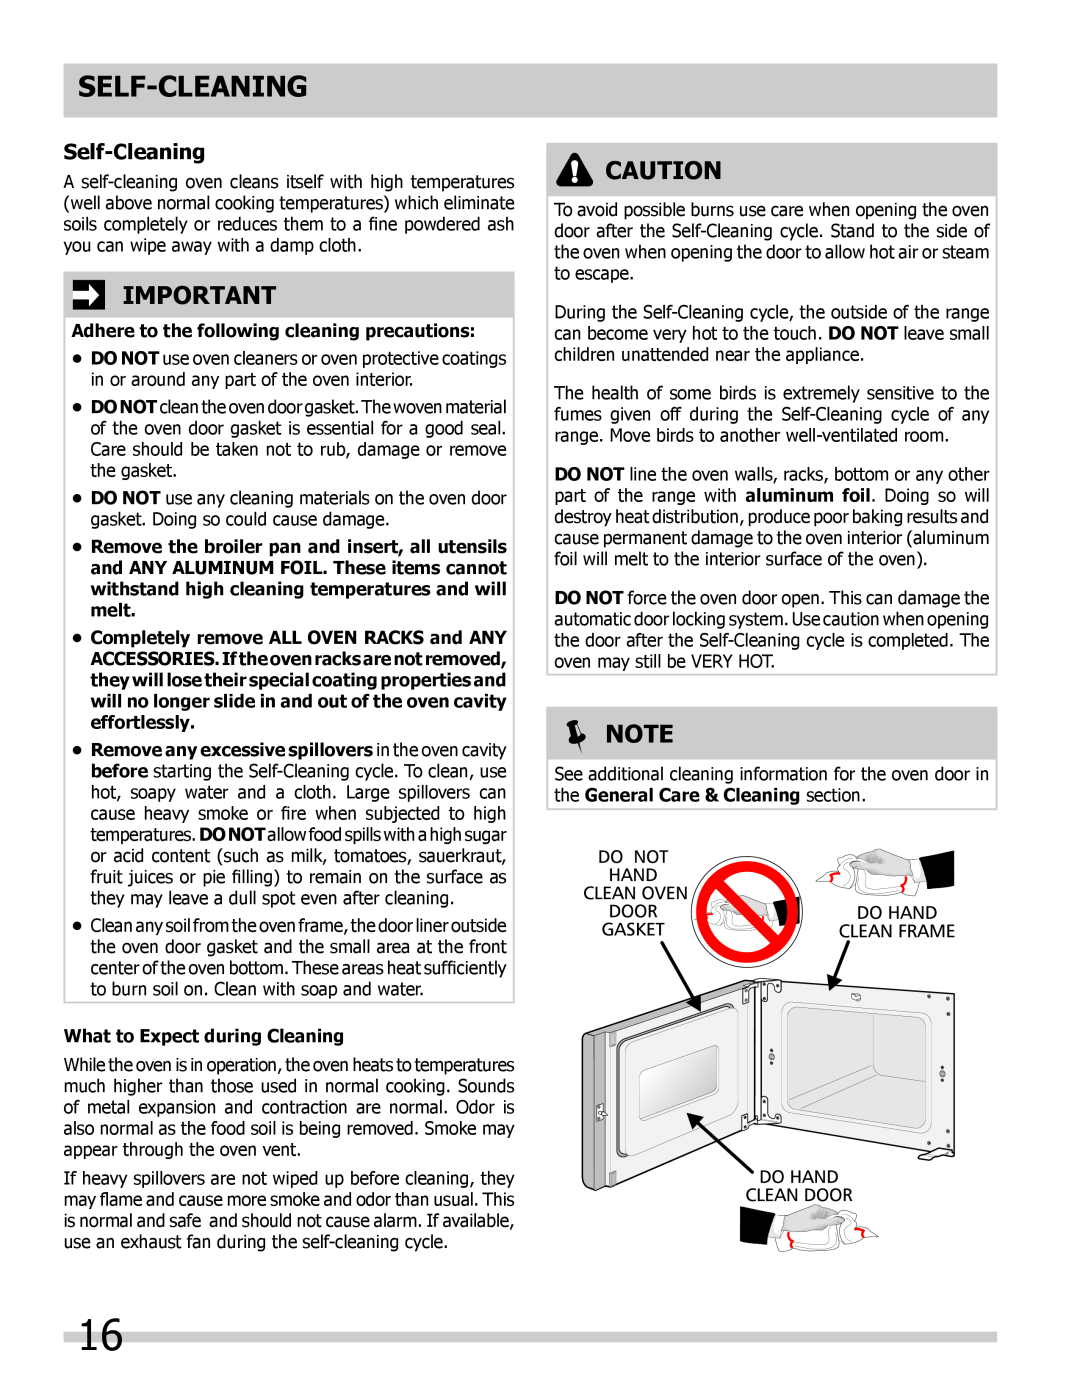 Frigidaire 318205325 Self-Cleaning, Adhere to the following cleaning precautions, What to Expect during Cleaning,  Note 